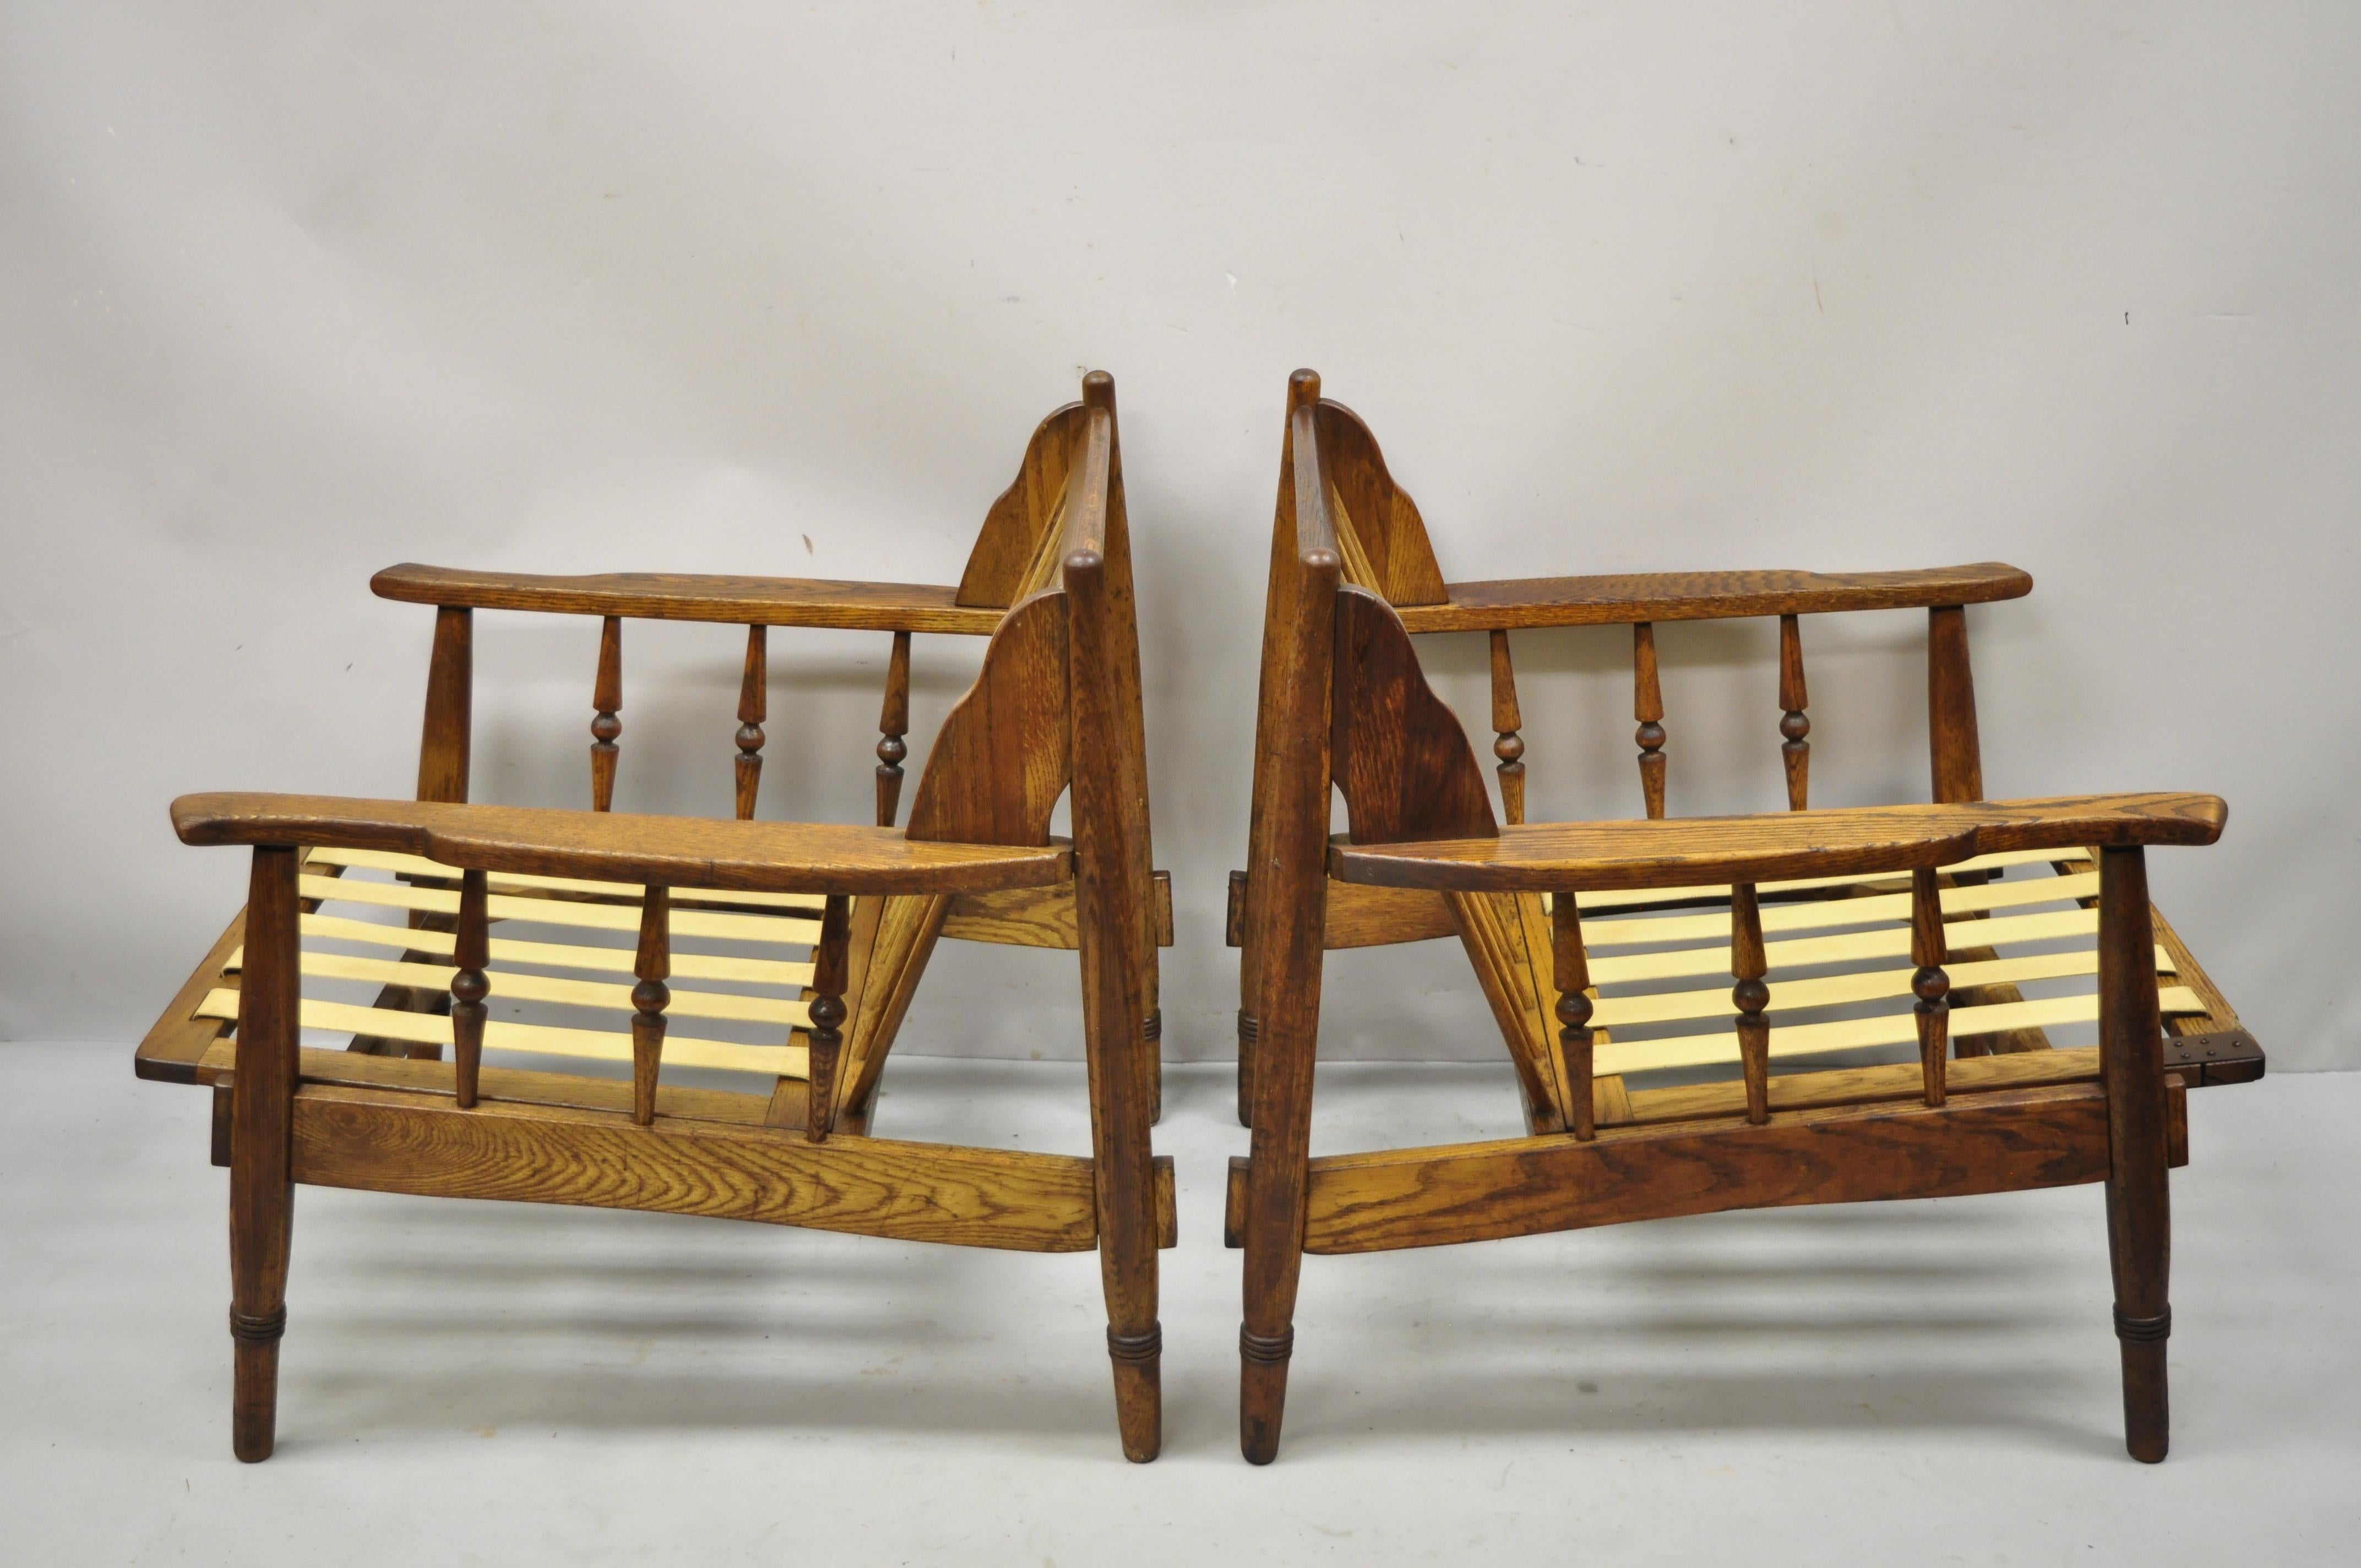 Mid-Century Modern spindle back oak wood danish style lounge club chairs - a pair. Item features spindle carved sides, solid oak wood frames, beautiful wood grain, very nice vintage pair, quality craftsmanship, great style and form. Circa Mid 20th